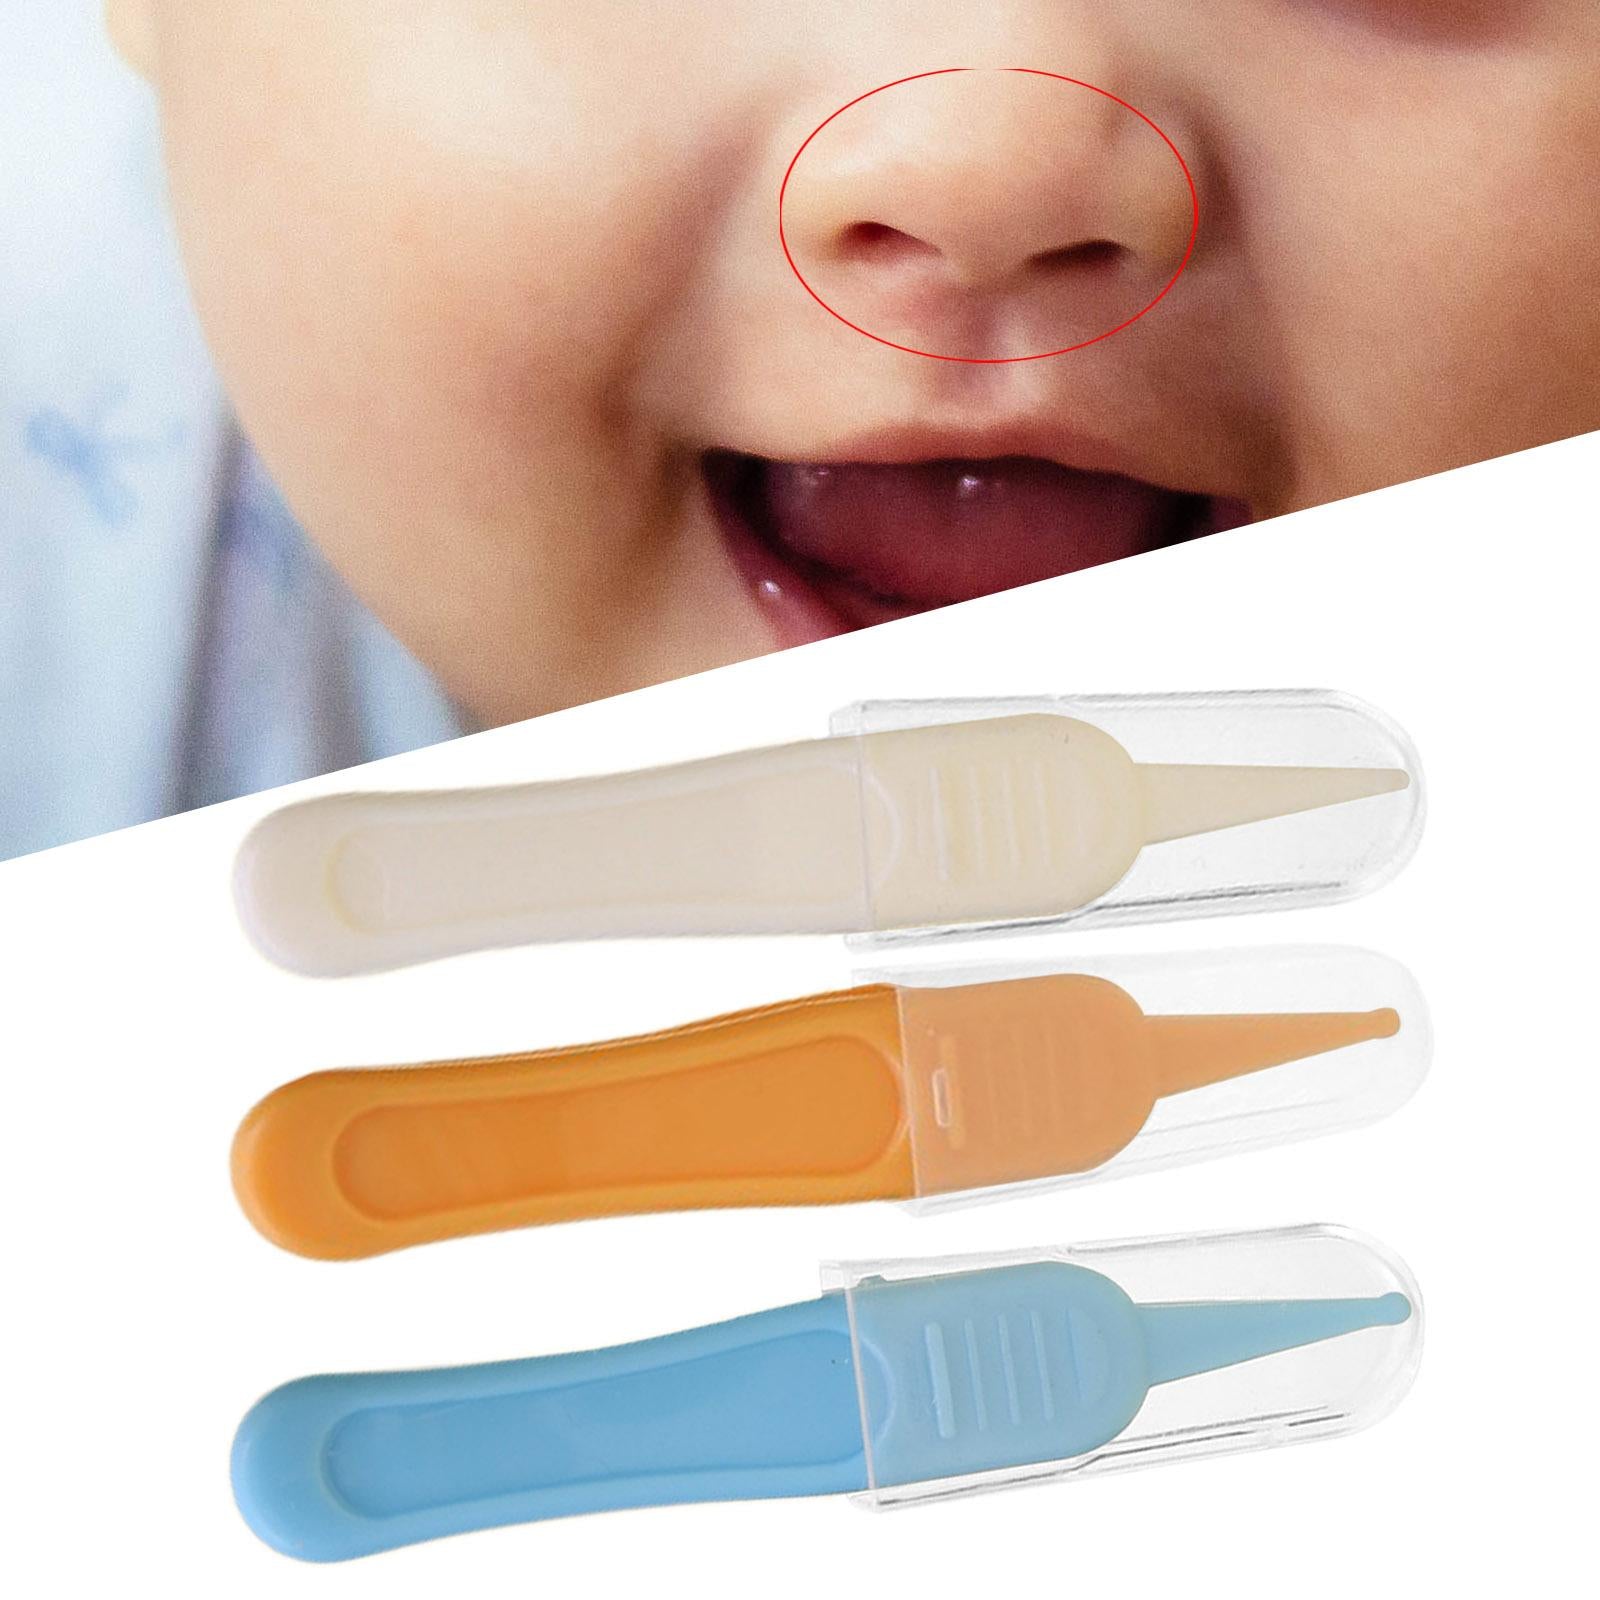 Baby Nose Tweezers Infant Ear Nose Navel Cleaning Tweezers Forceps White